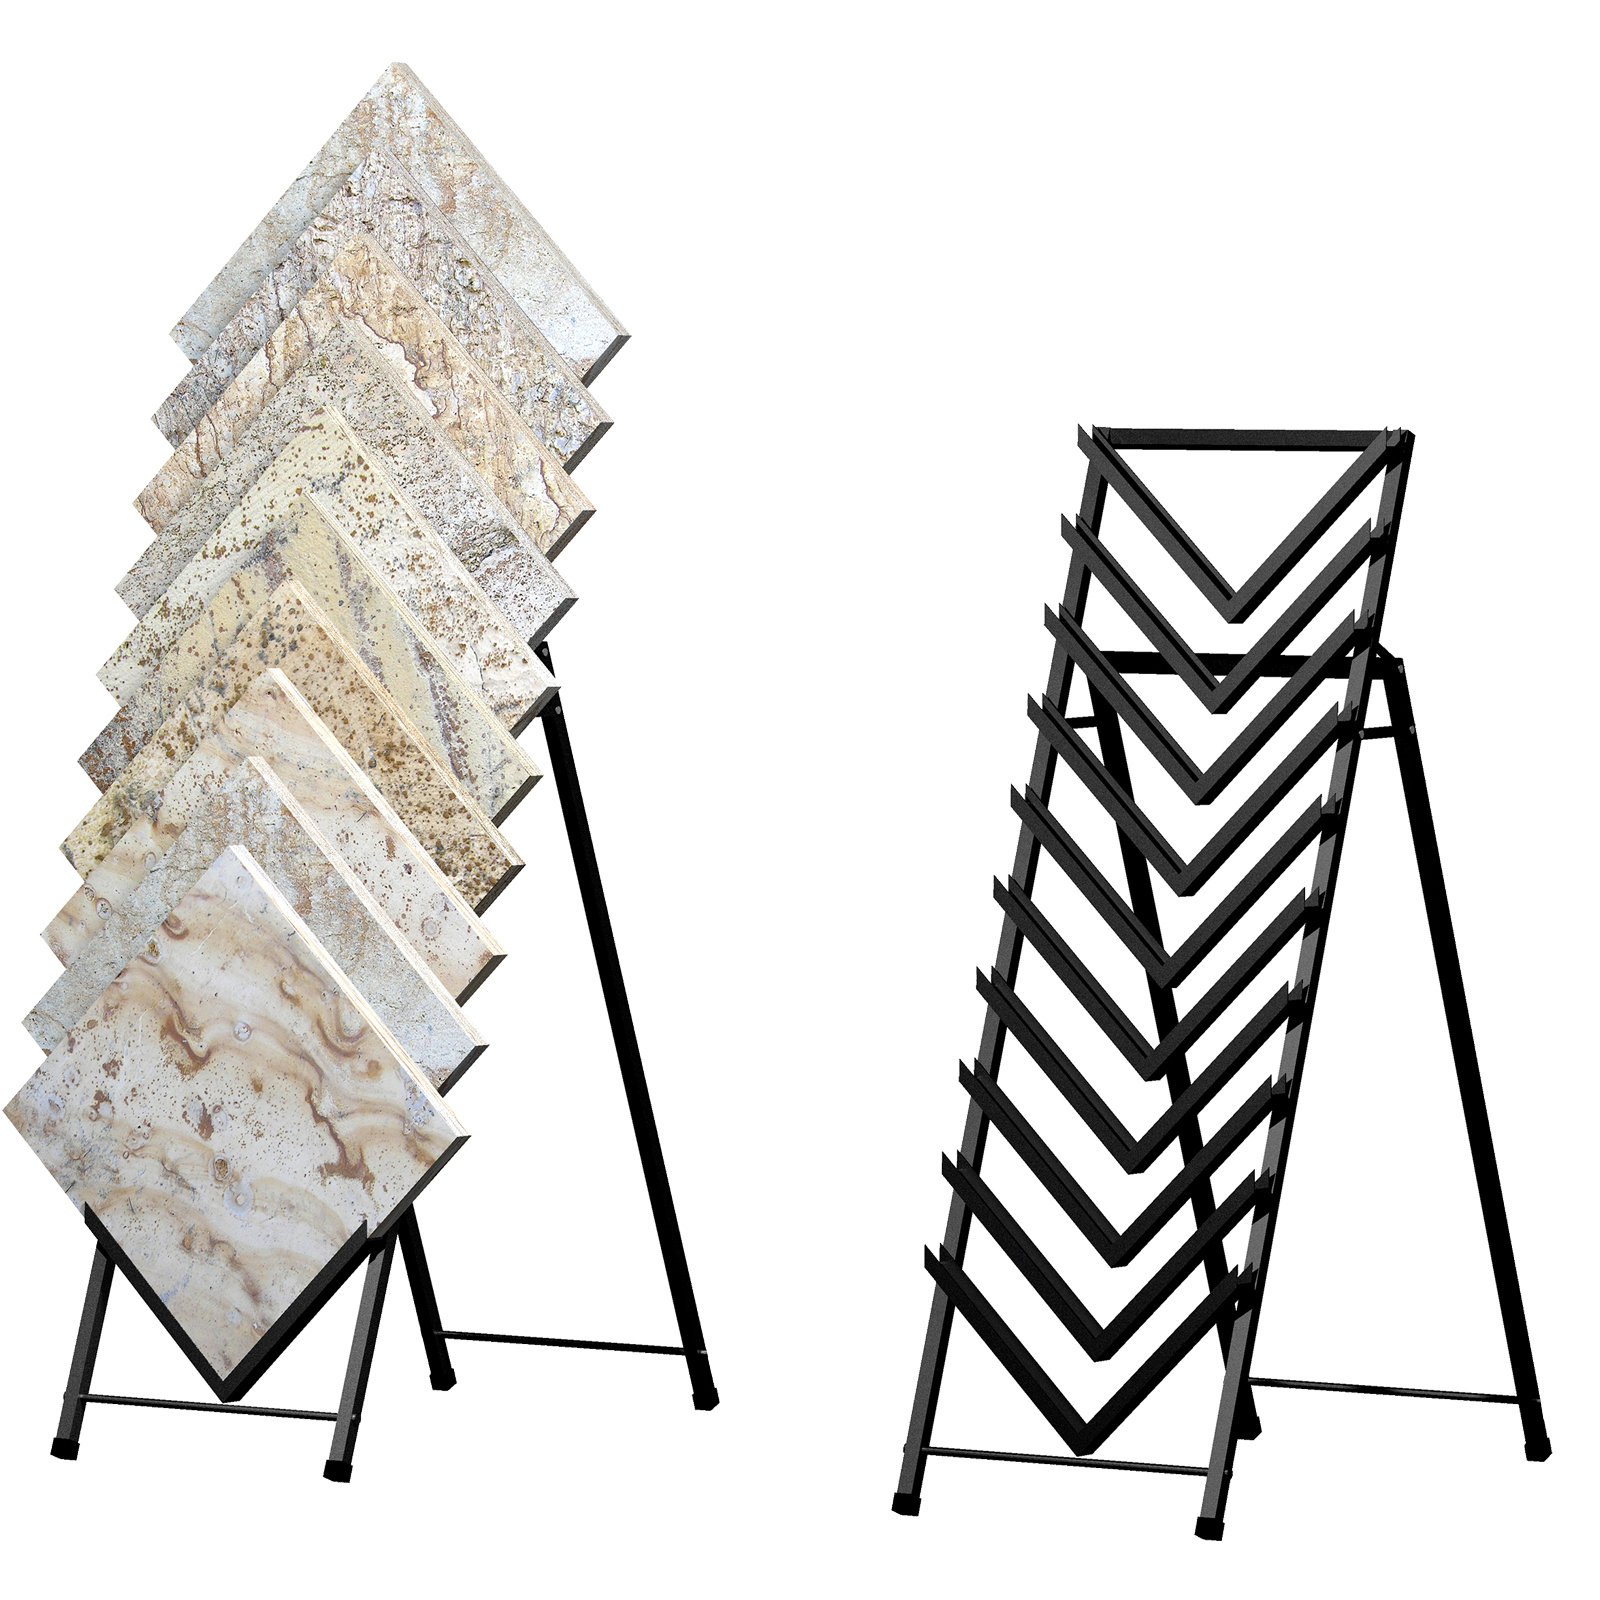 A10 Low Cost Tradeshow Easel A-Frame Ceramic Tile Stone Marble Showroom Displays McColl Display